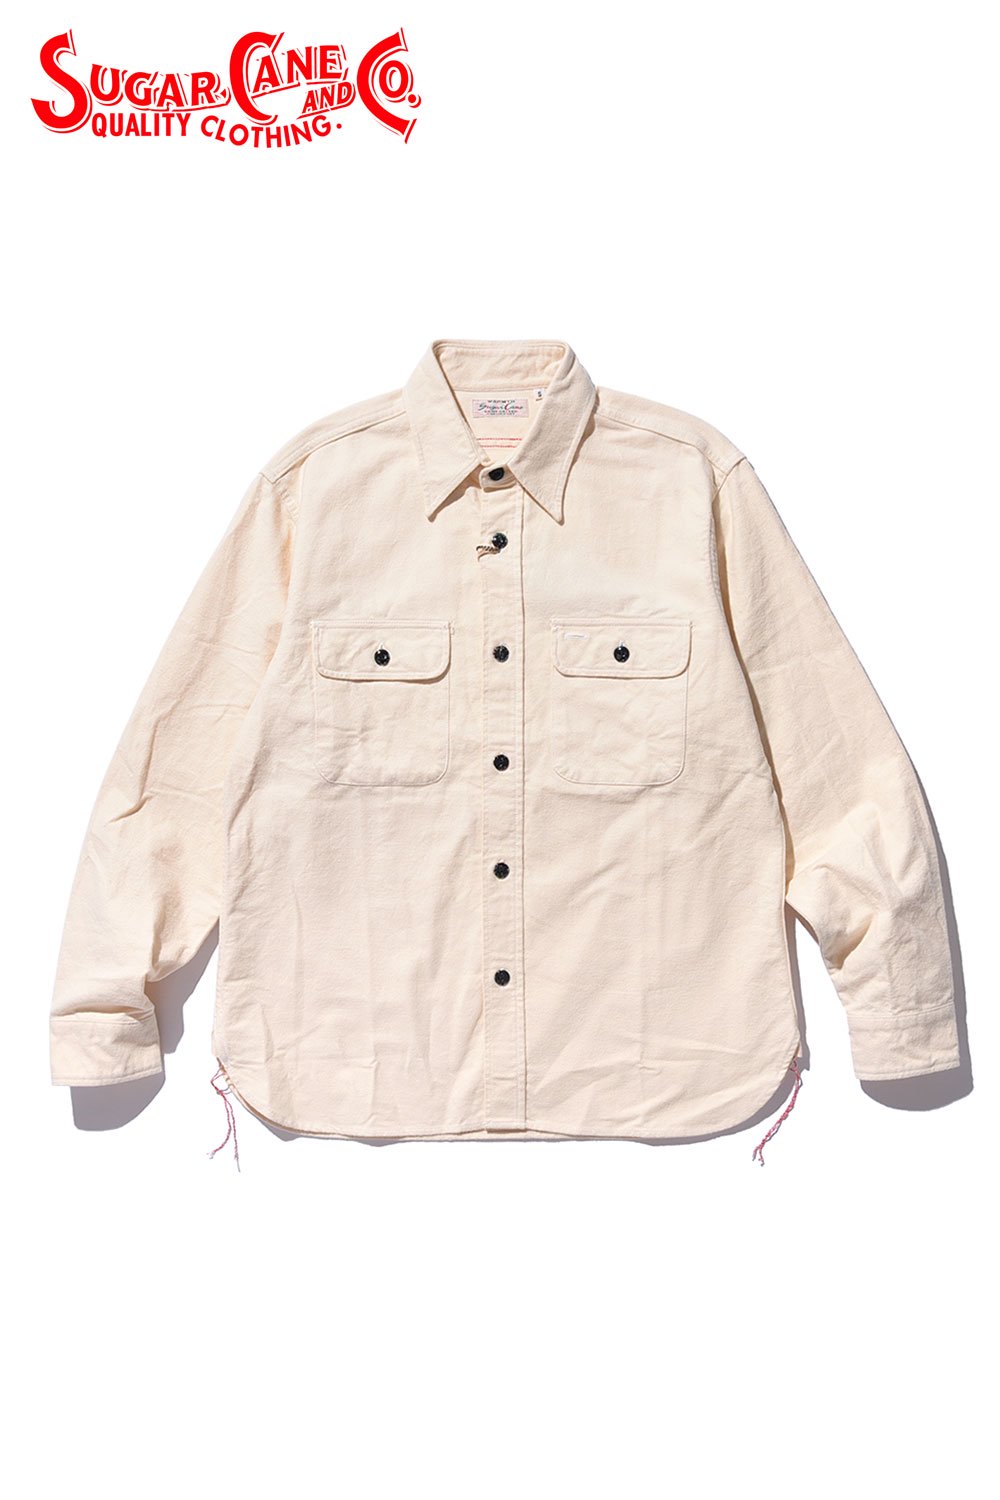 SUGAR CANE(シュガーケーン) ヘビーツイルシャツ FICTION ROMANCE 9.5oz. HEAVY TWILL with  MARBLE BUTTON SC28753 通販正規取扱 | ハーレムストア公式通販サイト